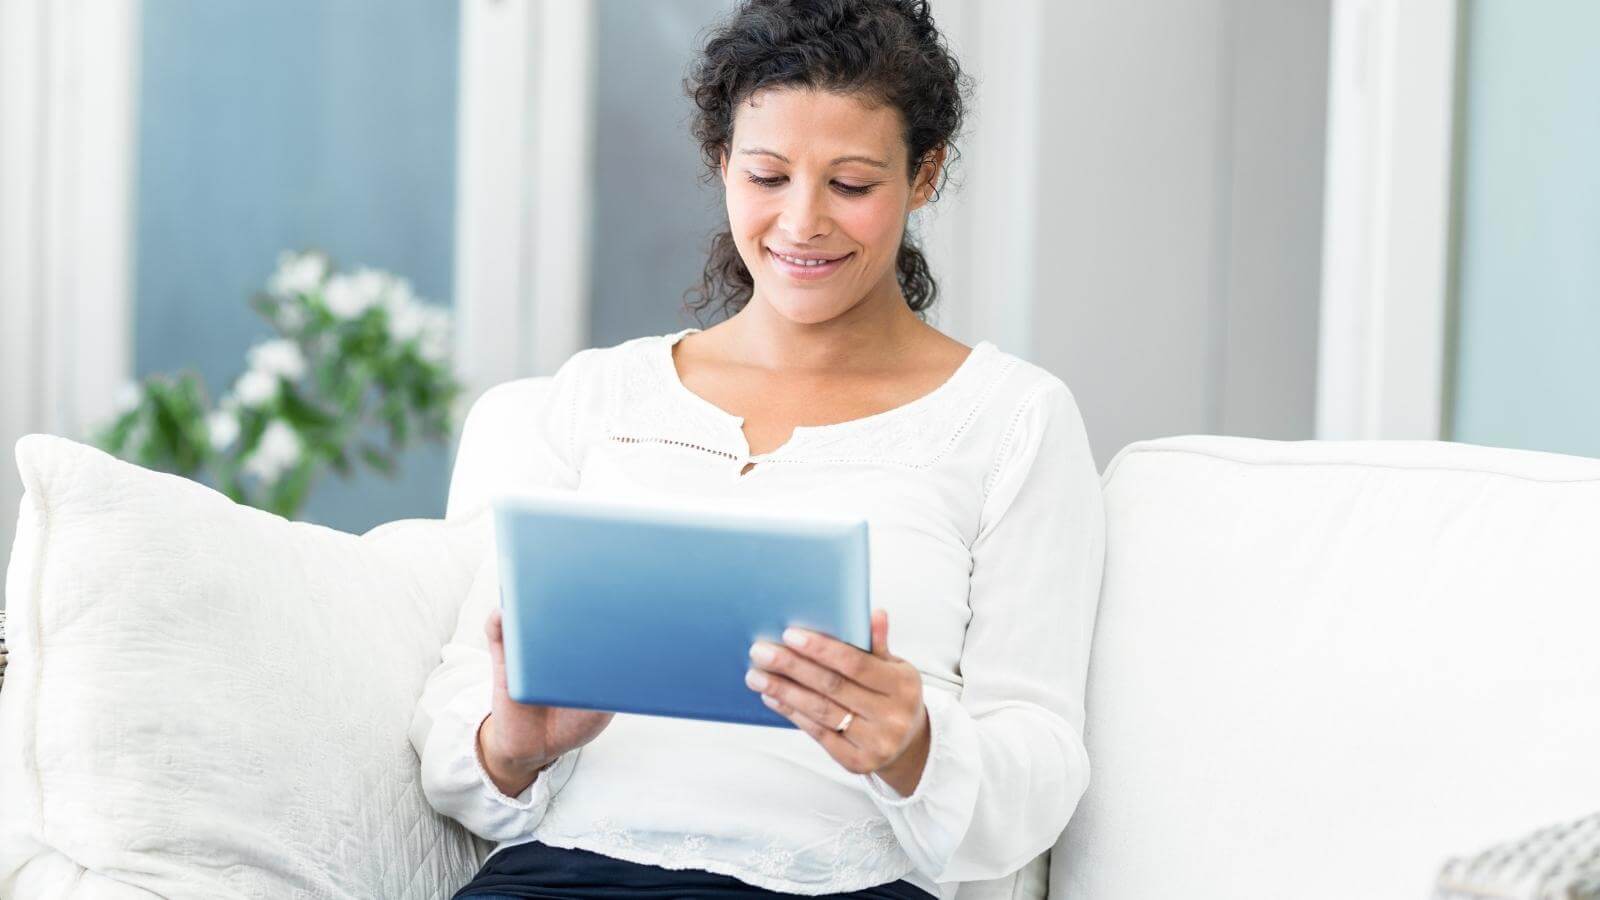 Woman working on tablet